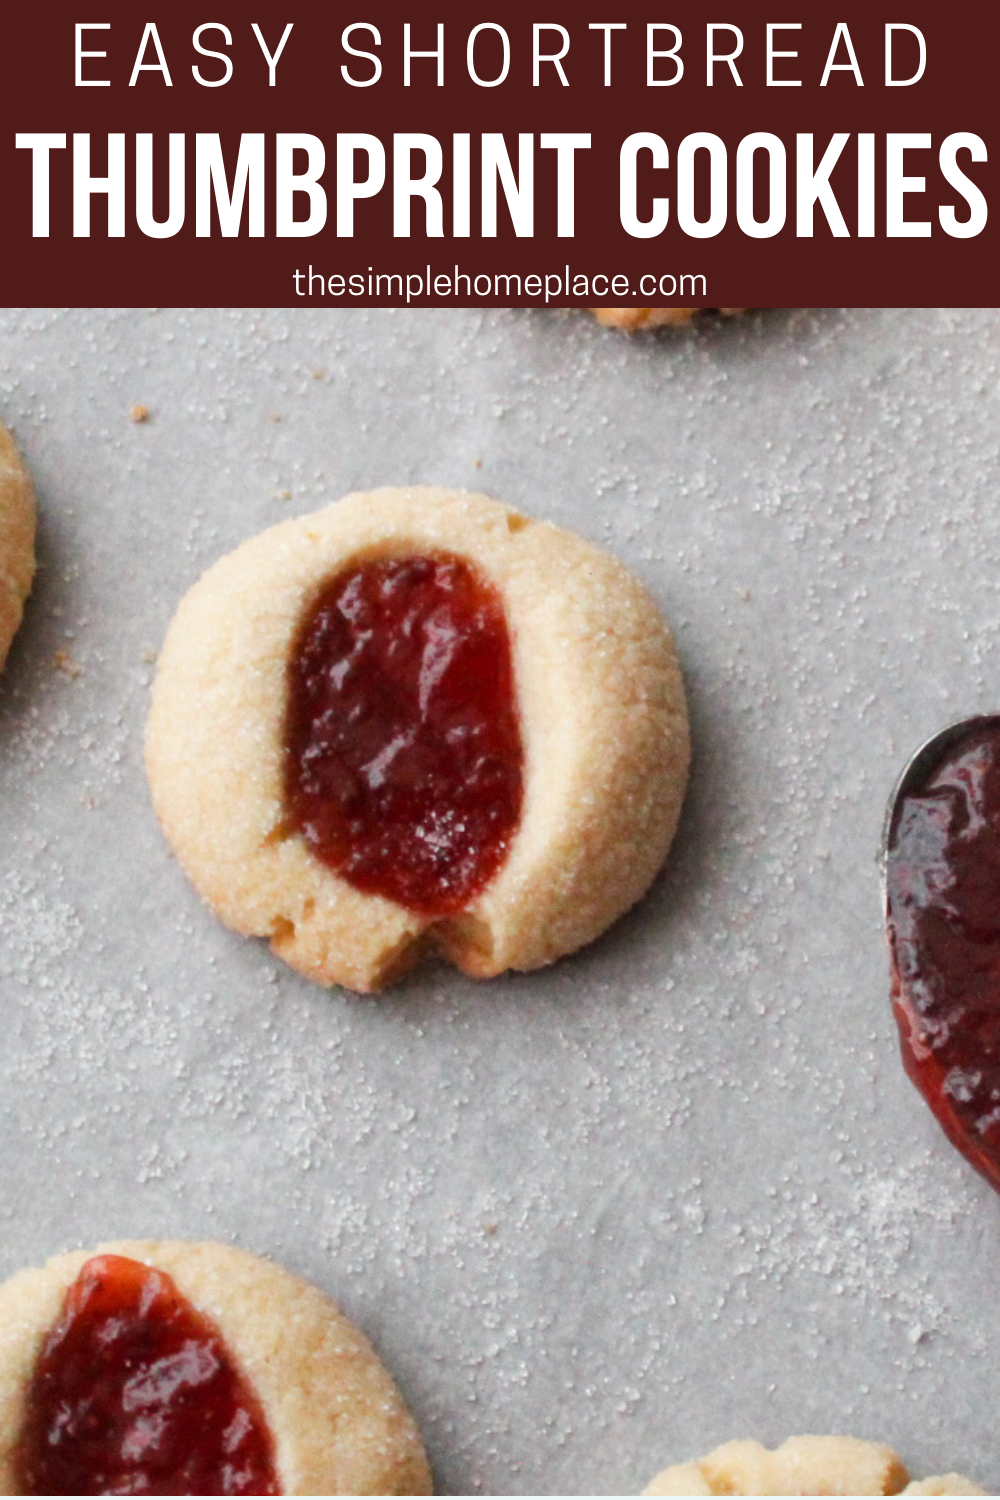 Easy Shortbread Thumbprint Cookies - The Simple Homeplace